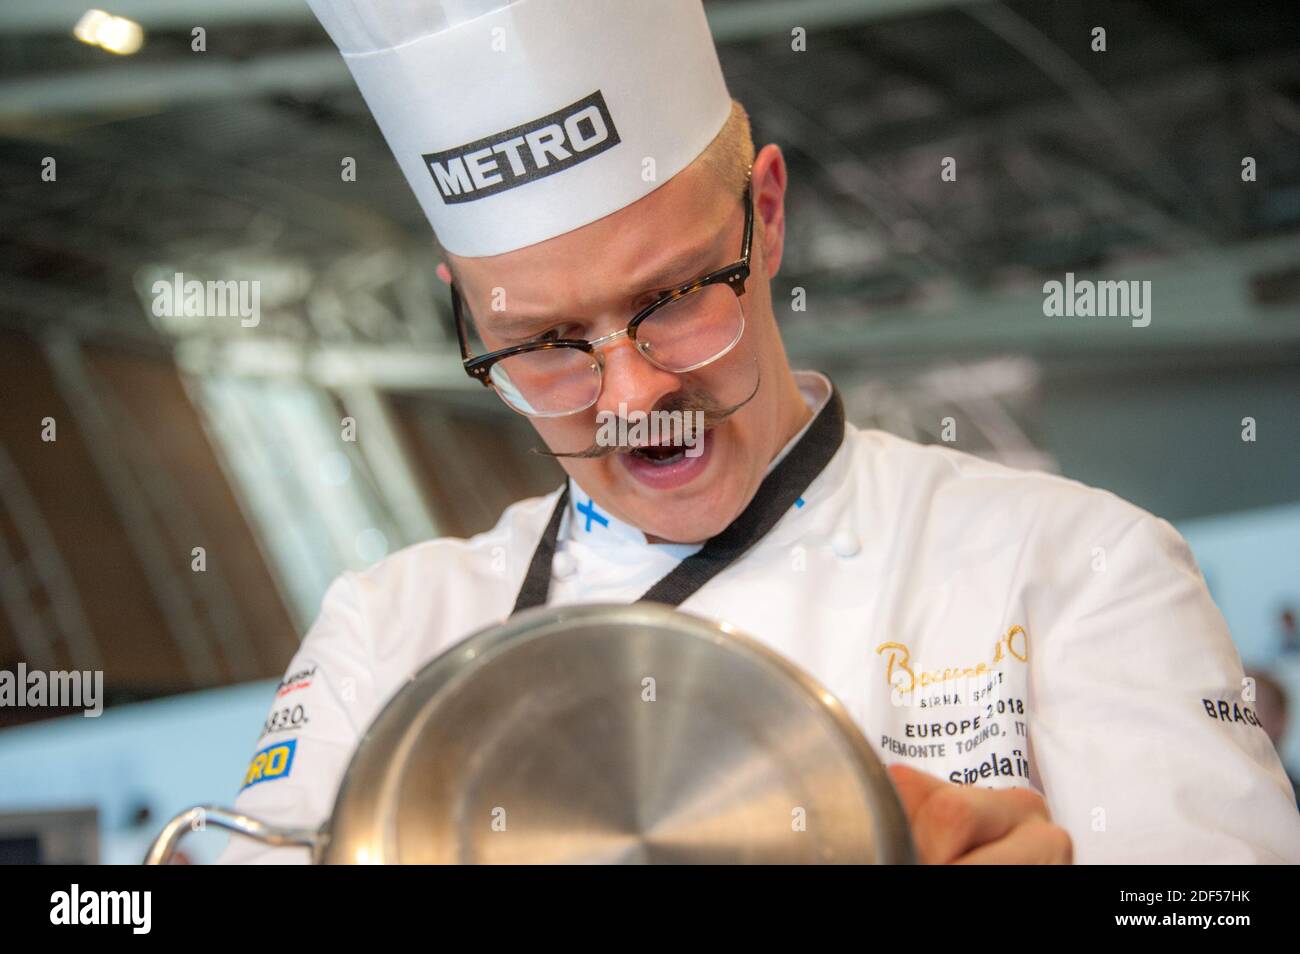 06/12/2018 Turin (Italy) Ismo Sipelainen engaged in the preparation of a refined dish during the Bocuse d'Or challenge Stock Photo